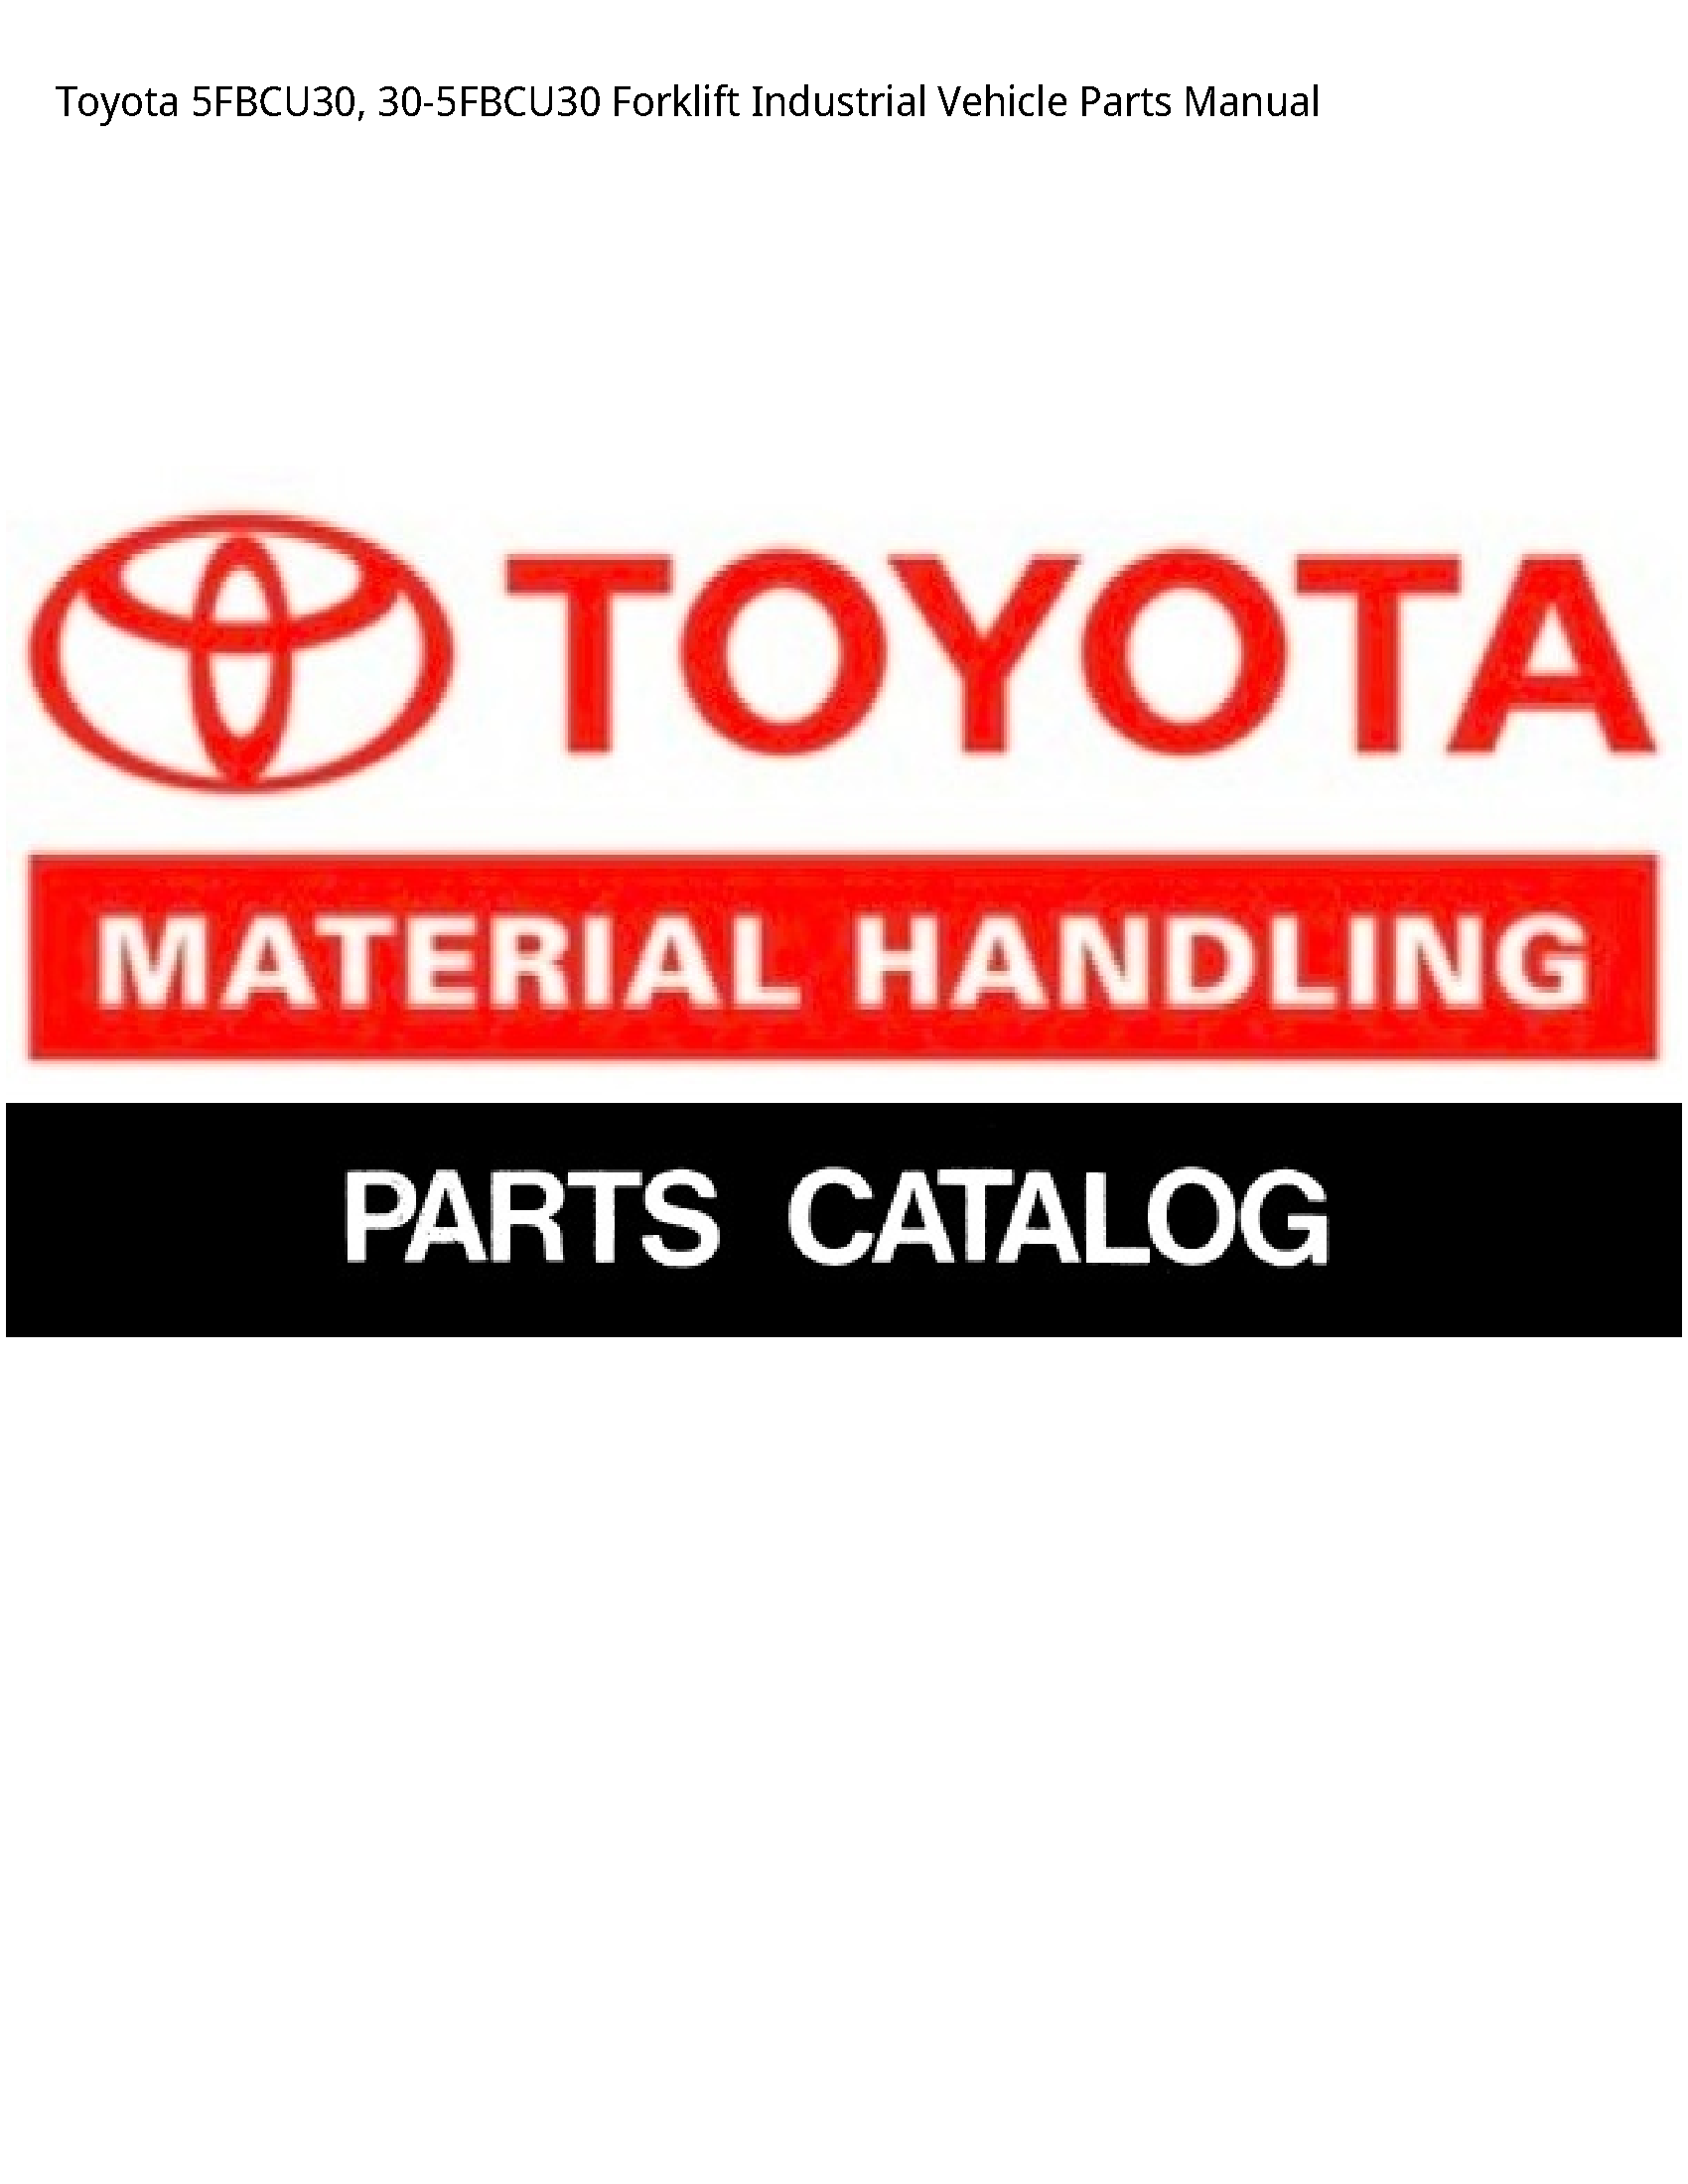 Toyota 5FBCU30 Forklift Industrial Vehicle Parts manual